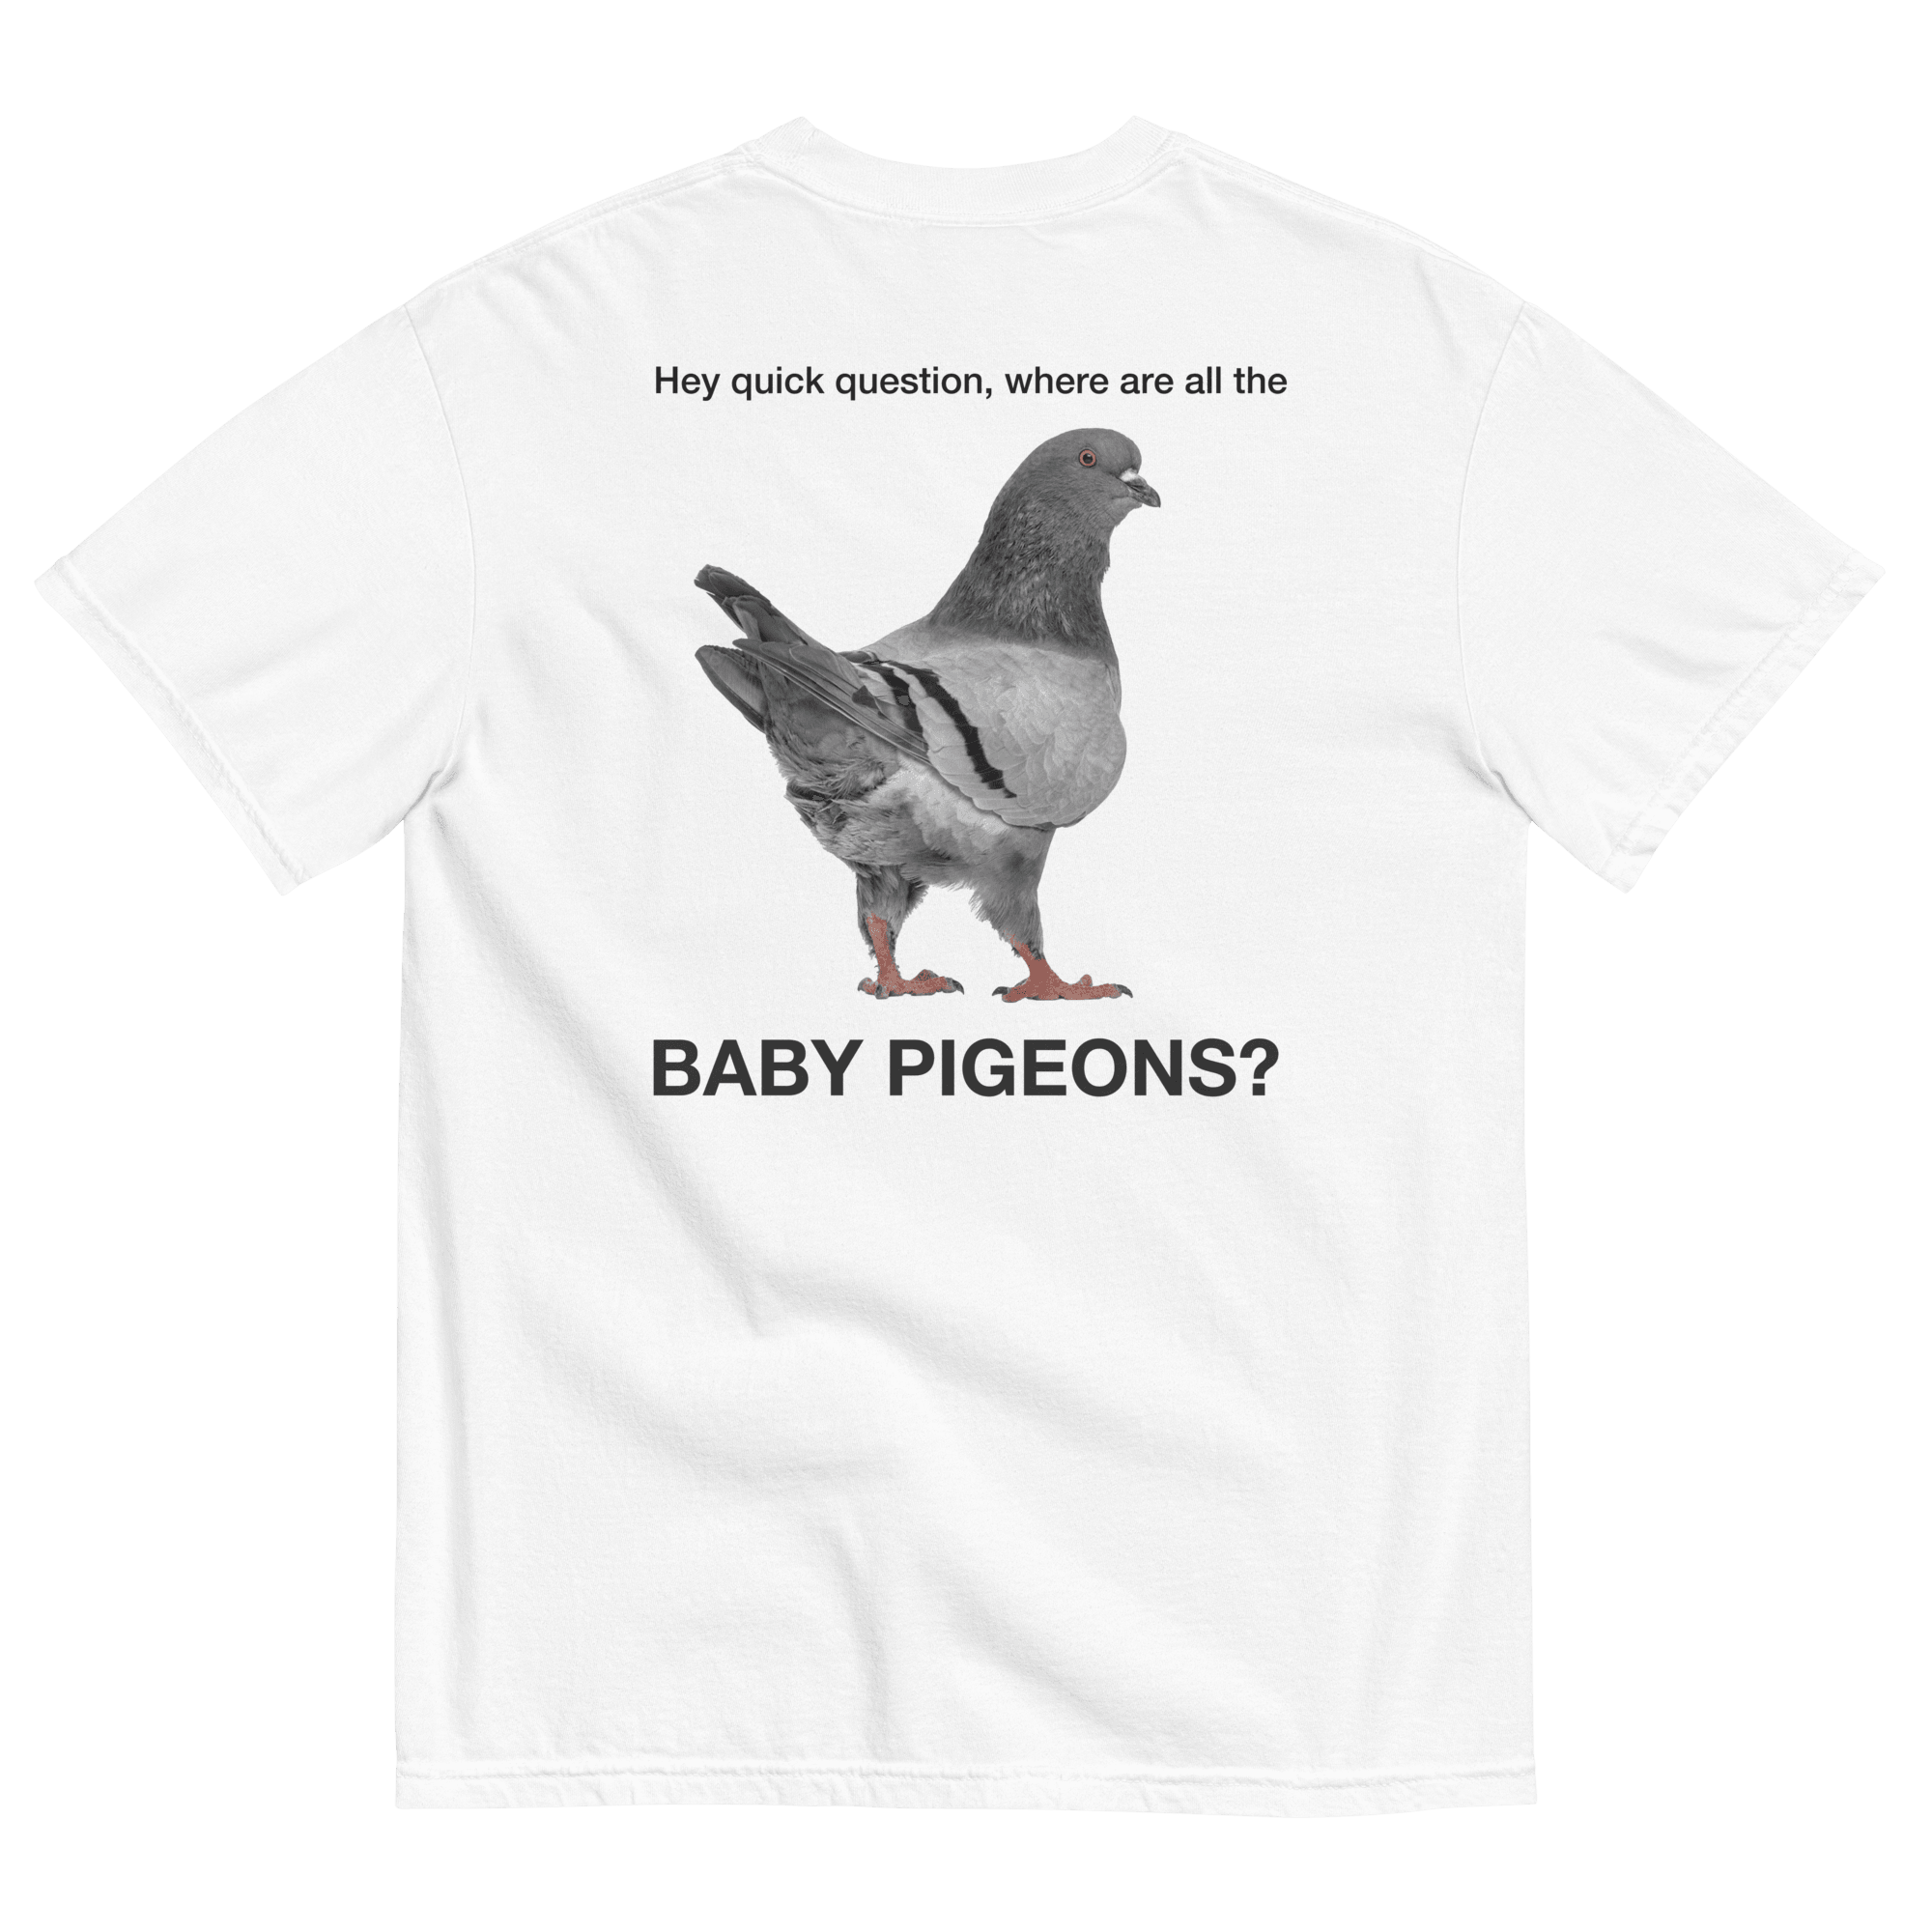 Hey quick question where are all the baby pigeons? 🐦 T-Shirt - Polychrome Goods 🍊